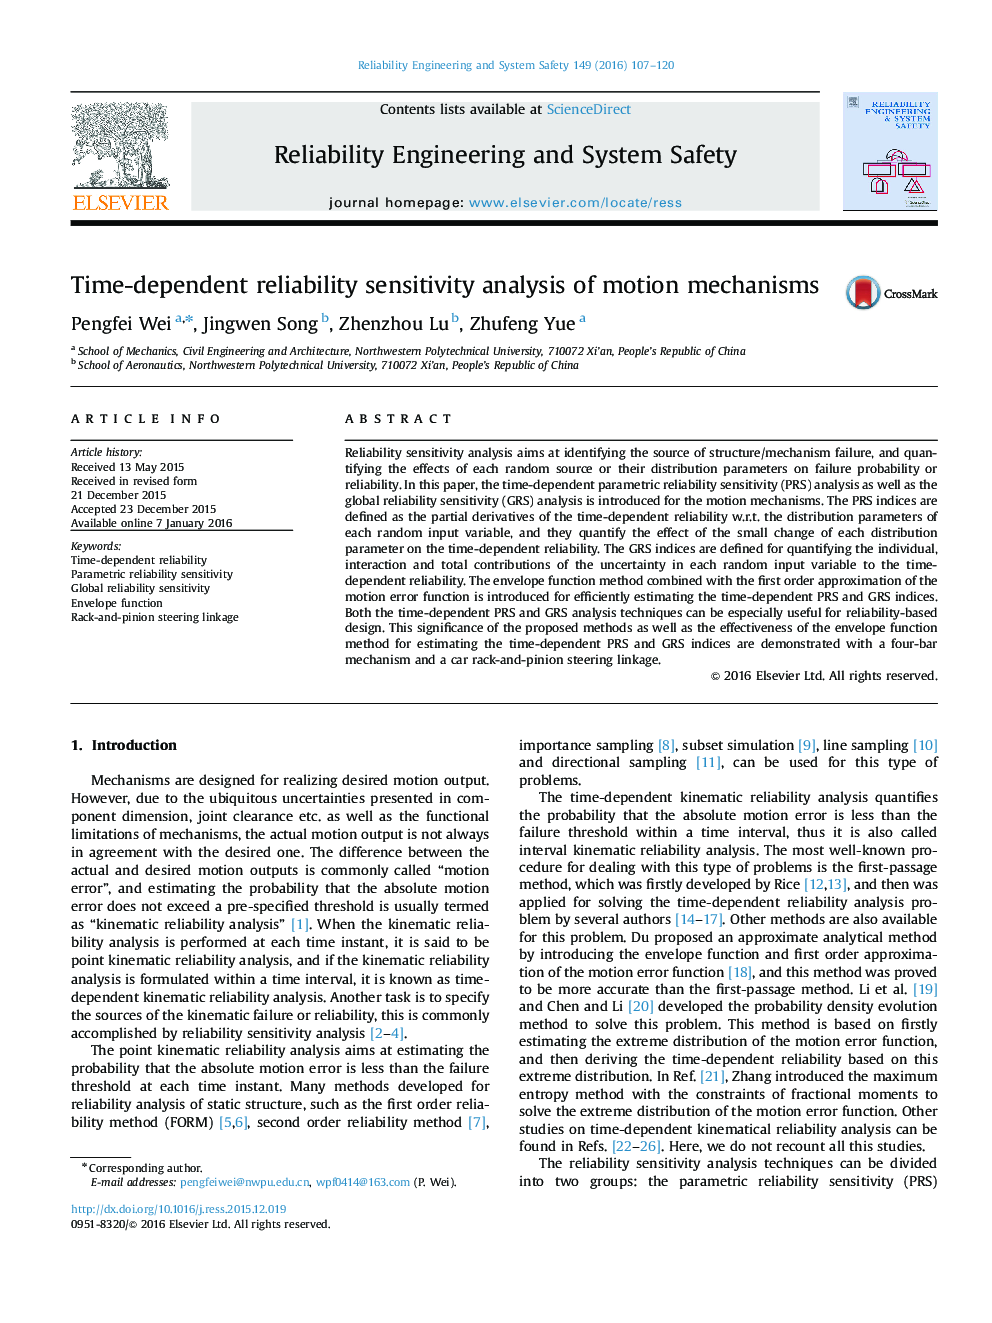 Time-dependent reliability sensitivity analysis of motion mechanisms